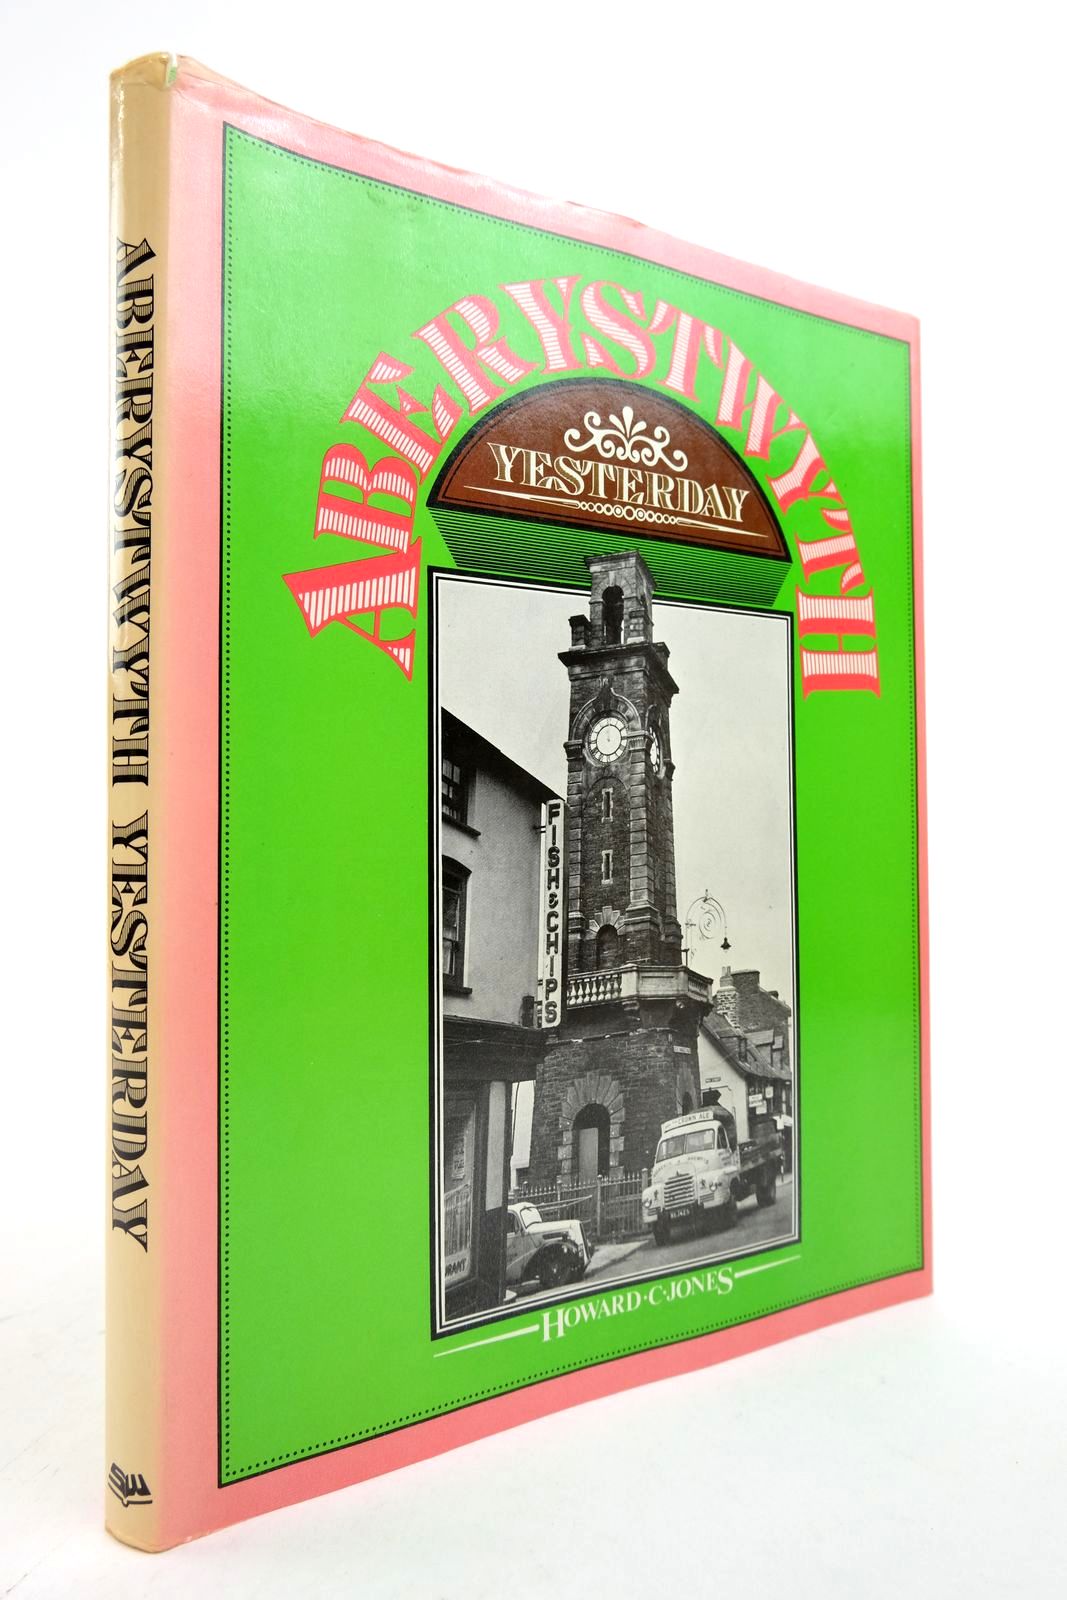 Photo of ABERYSTWYTH YESTERDAY written by Jones, Howard C. published by Stewart Williams (STOCK CODE: 2139334)  for sale by Stella & Rose's Books